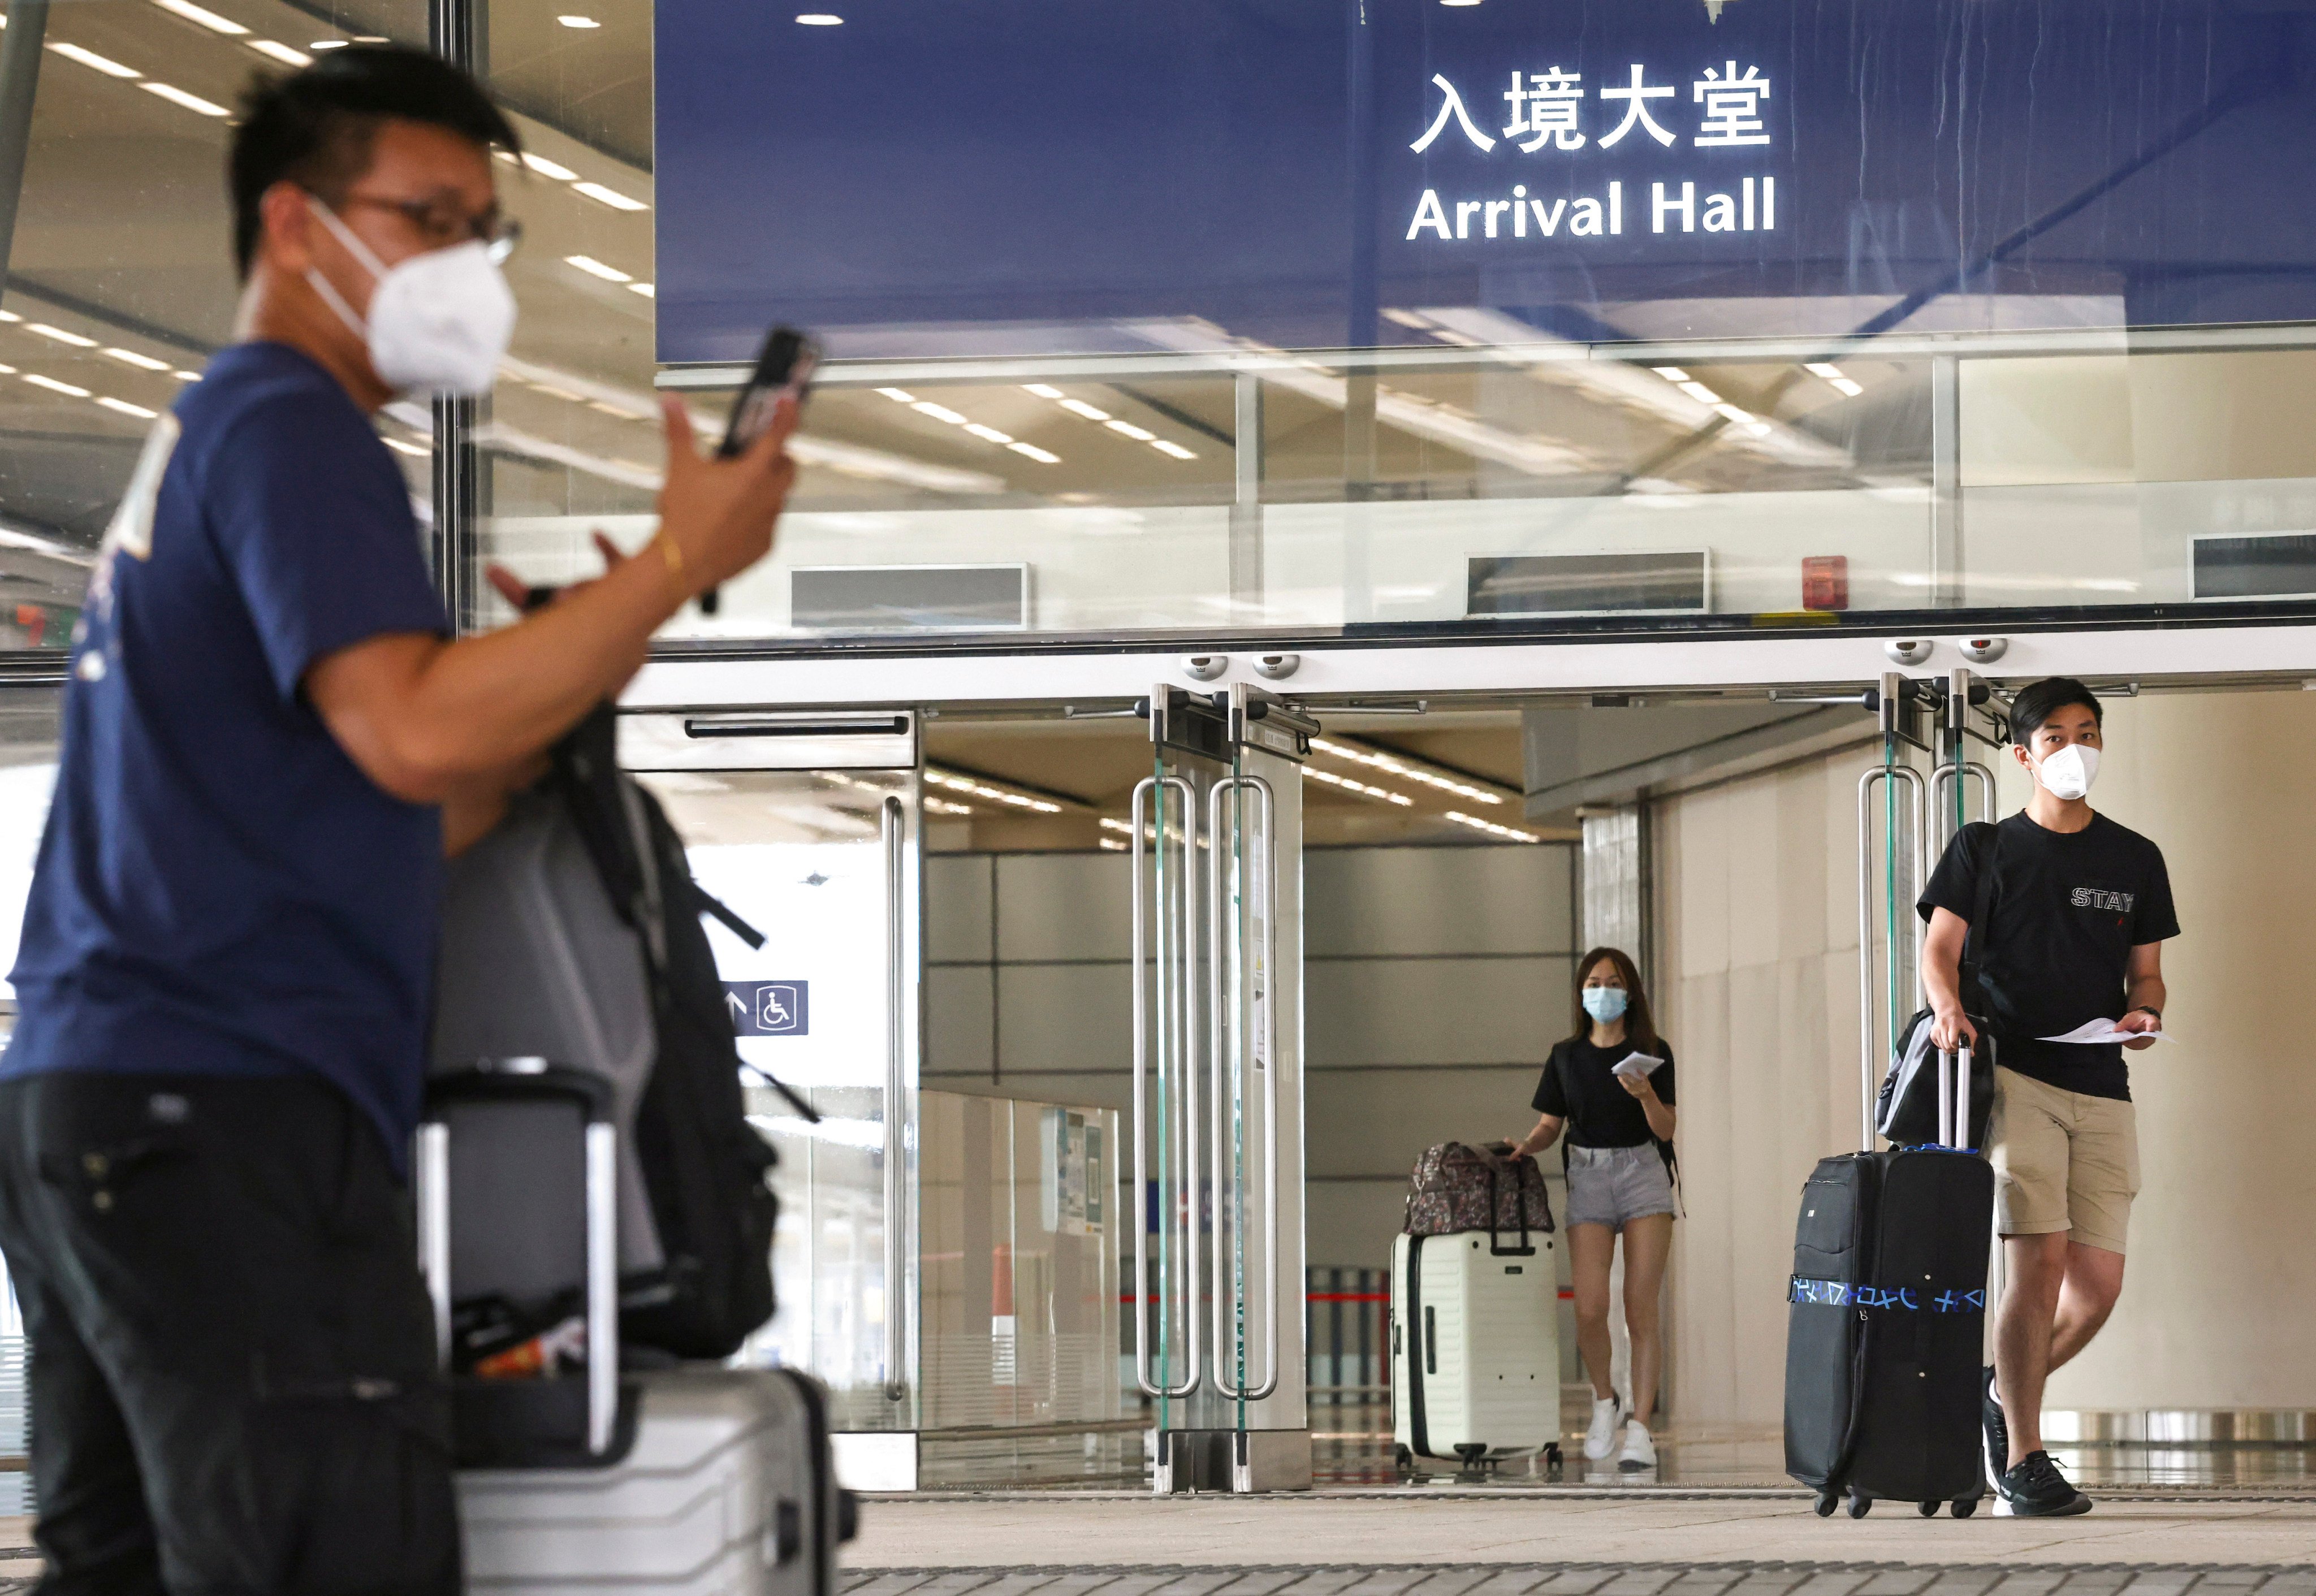 Hong Kong is reviewing rules surrounding temporary vaccine passes in a bid to shore up its Covid-19 containment policies. Photo: K. Y. Cheng